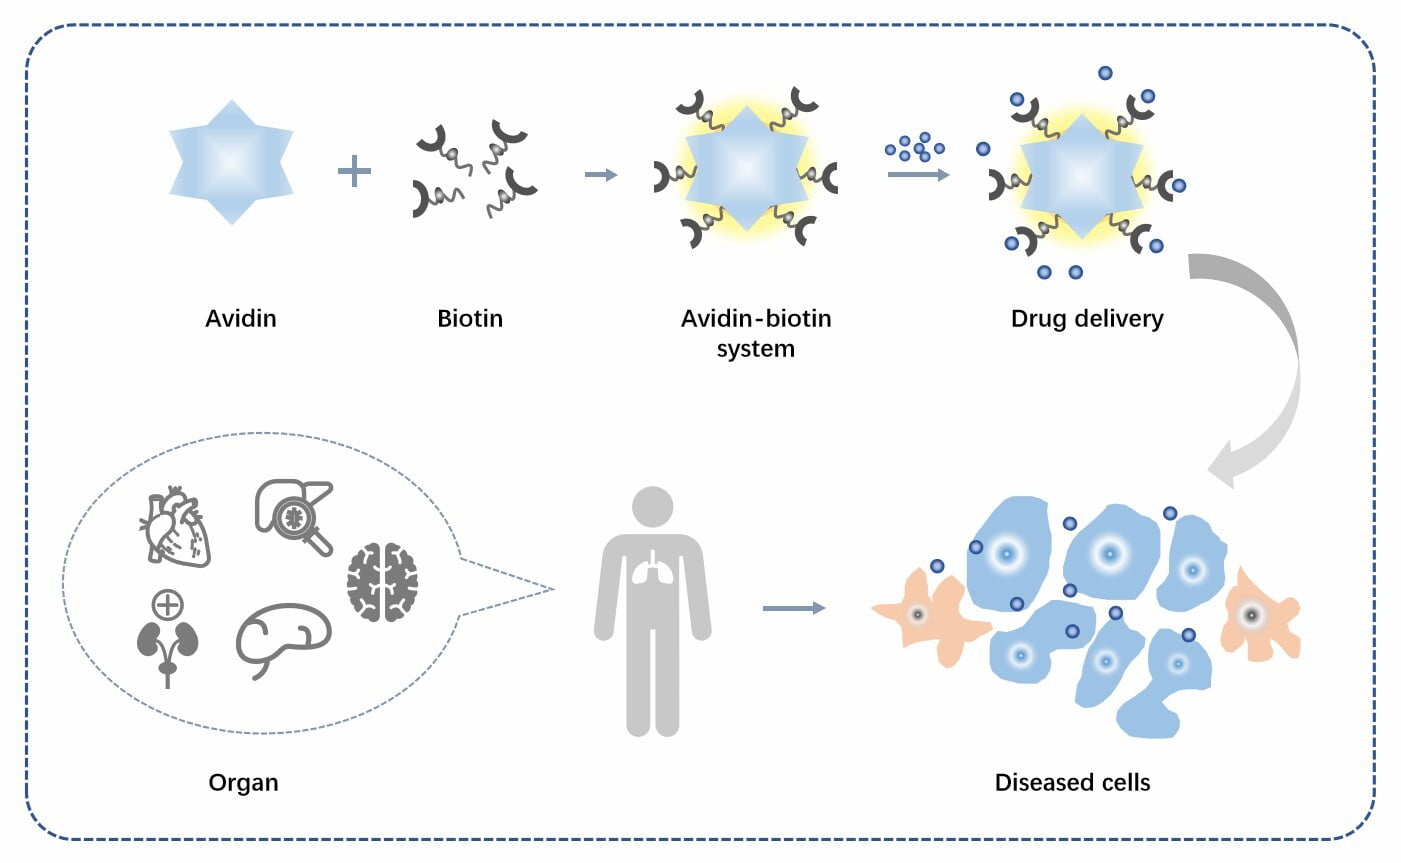 The avidin-biotin system can be used for efficient targeted drug delivery